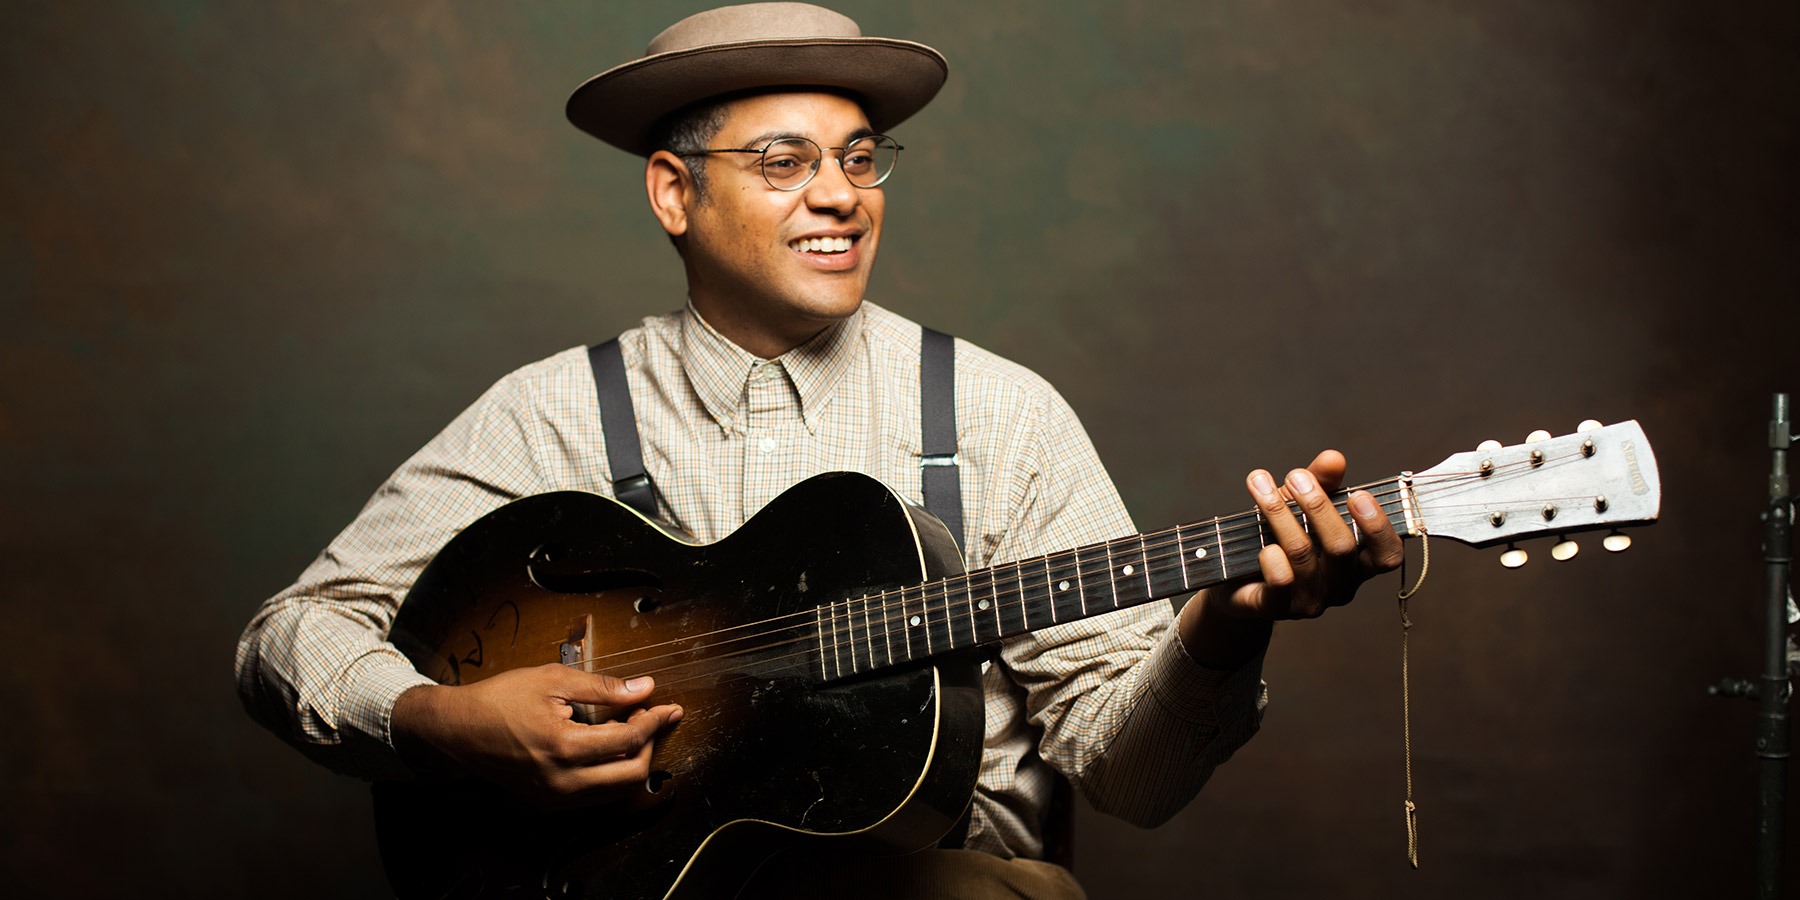 Man with an old-timey hat, round glasses, suspenders, button-up long-sleeve shirt playing a hollow-body guitar with f-holes